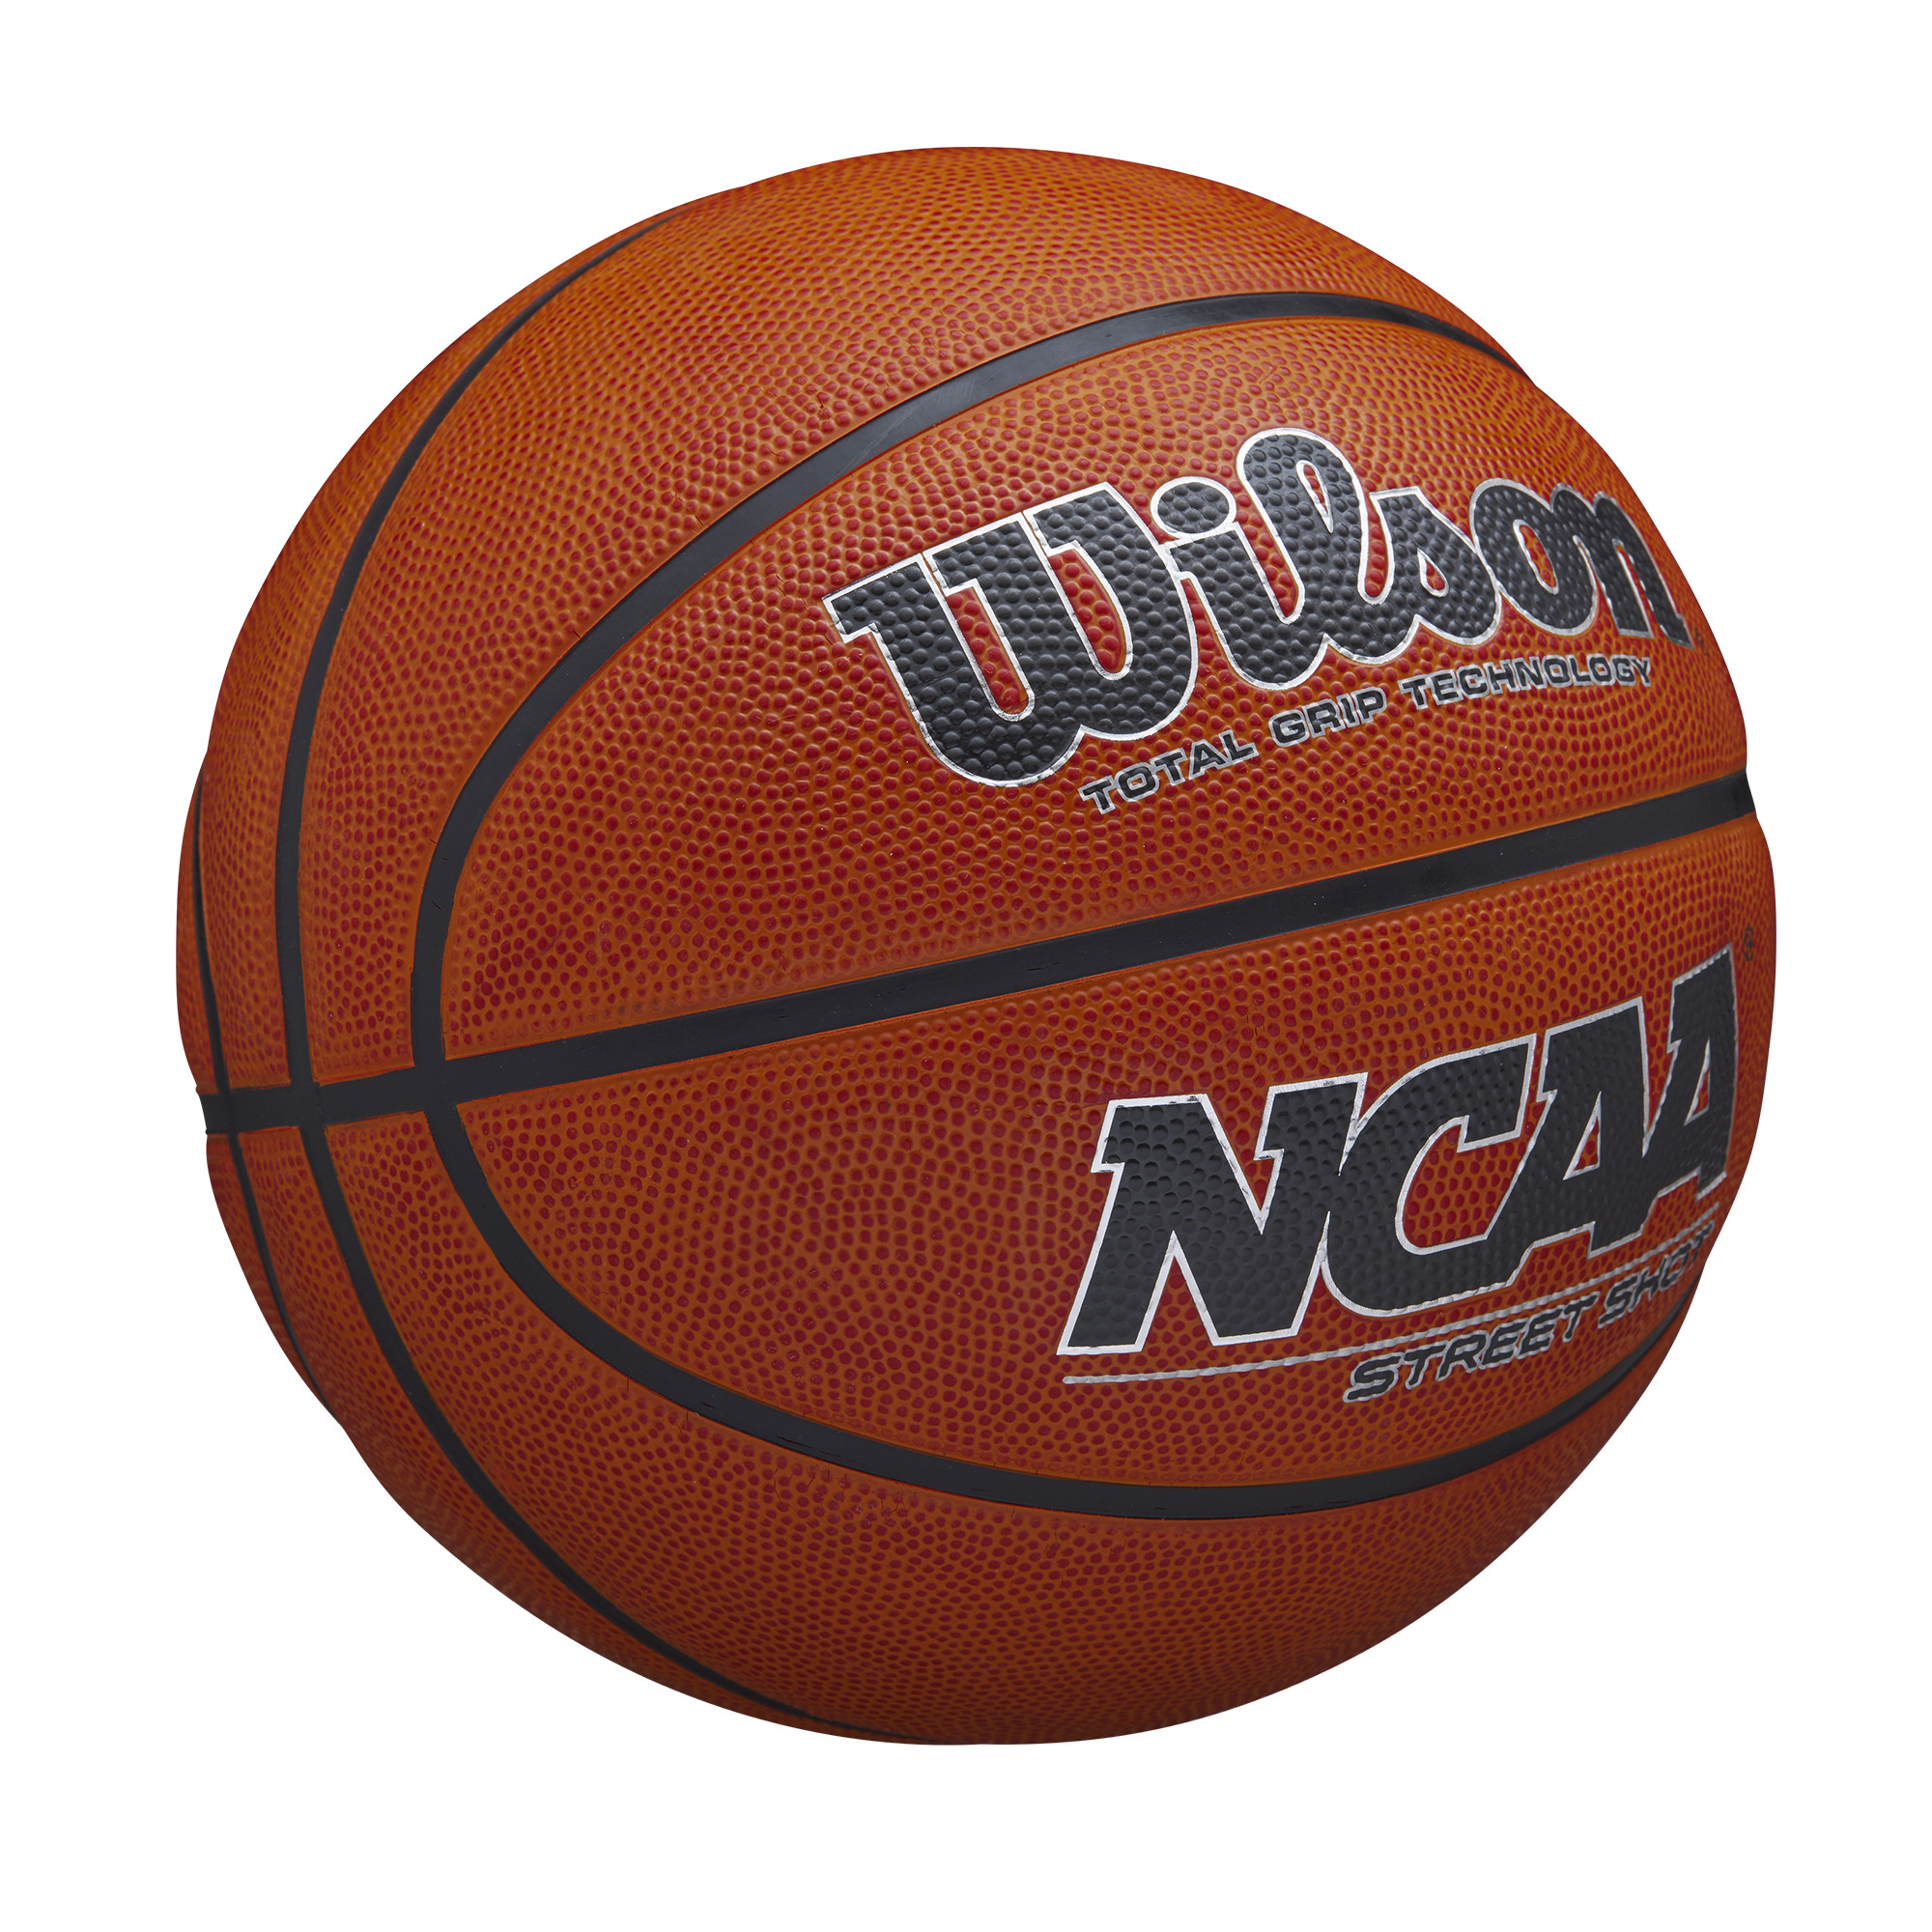 Wilson NCAA Street Shot Outdoor Basketball, Official Size 29.5" - image 2 of 6